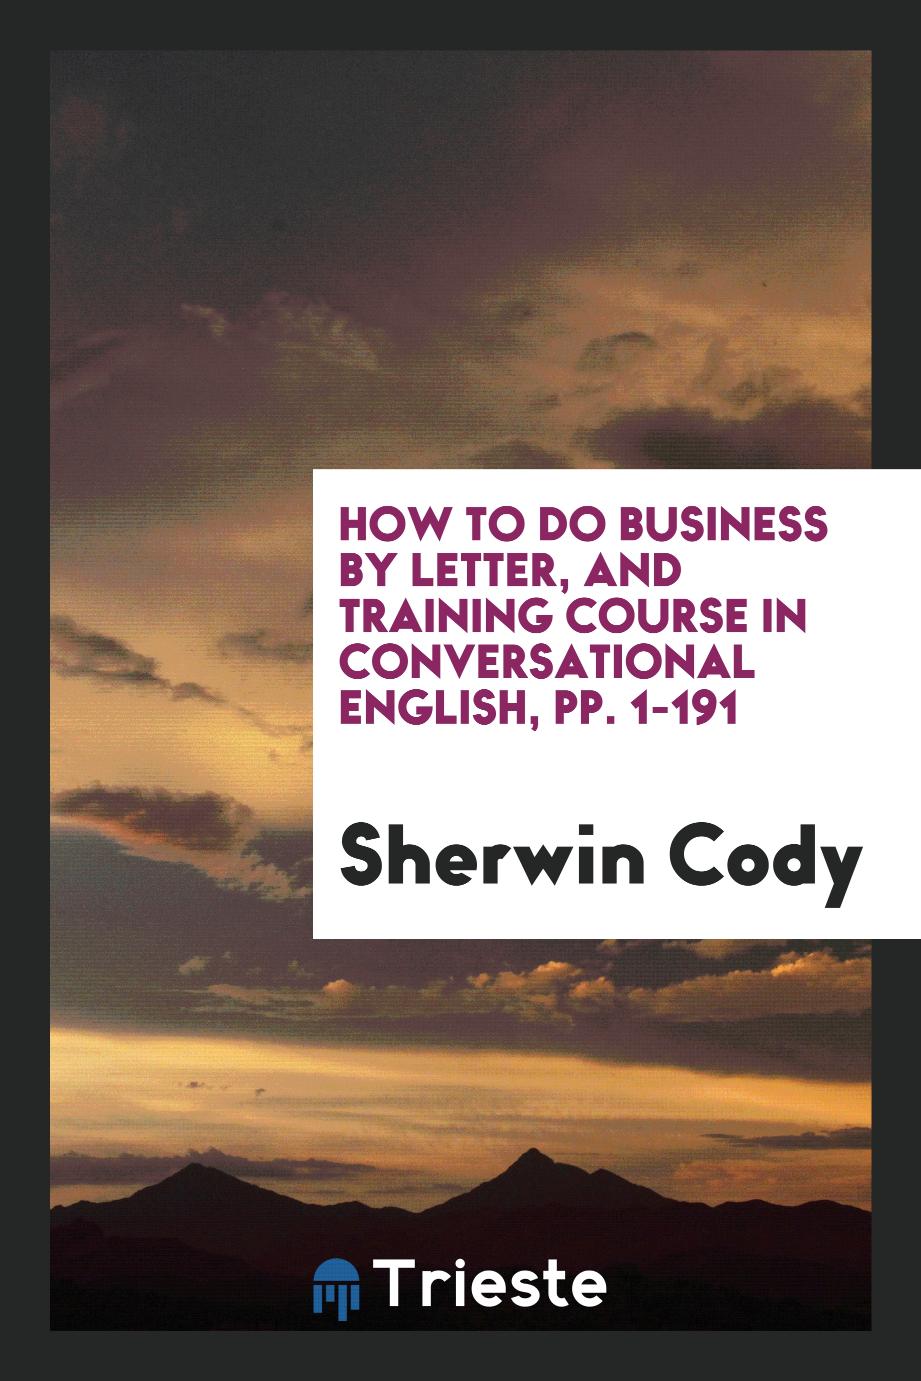 How to Do Business by Letter, and Training Course in Conversational English, pp. 1-191